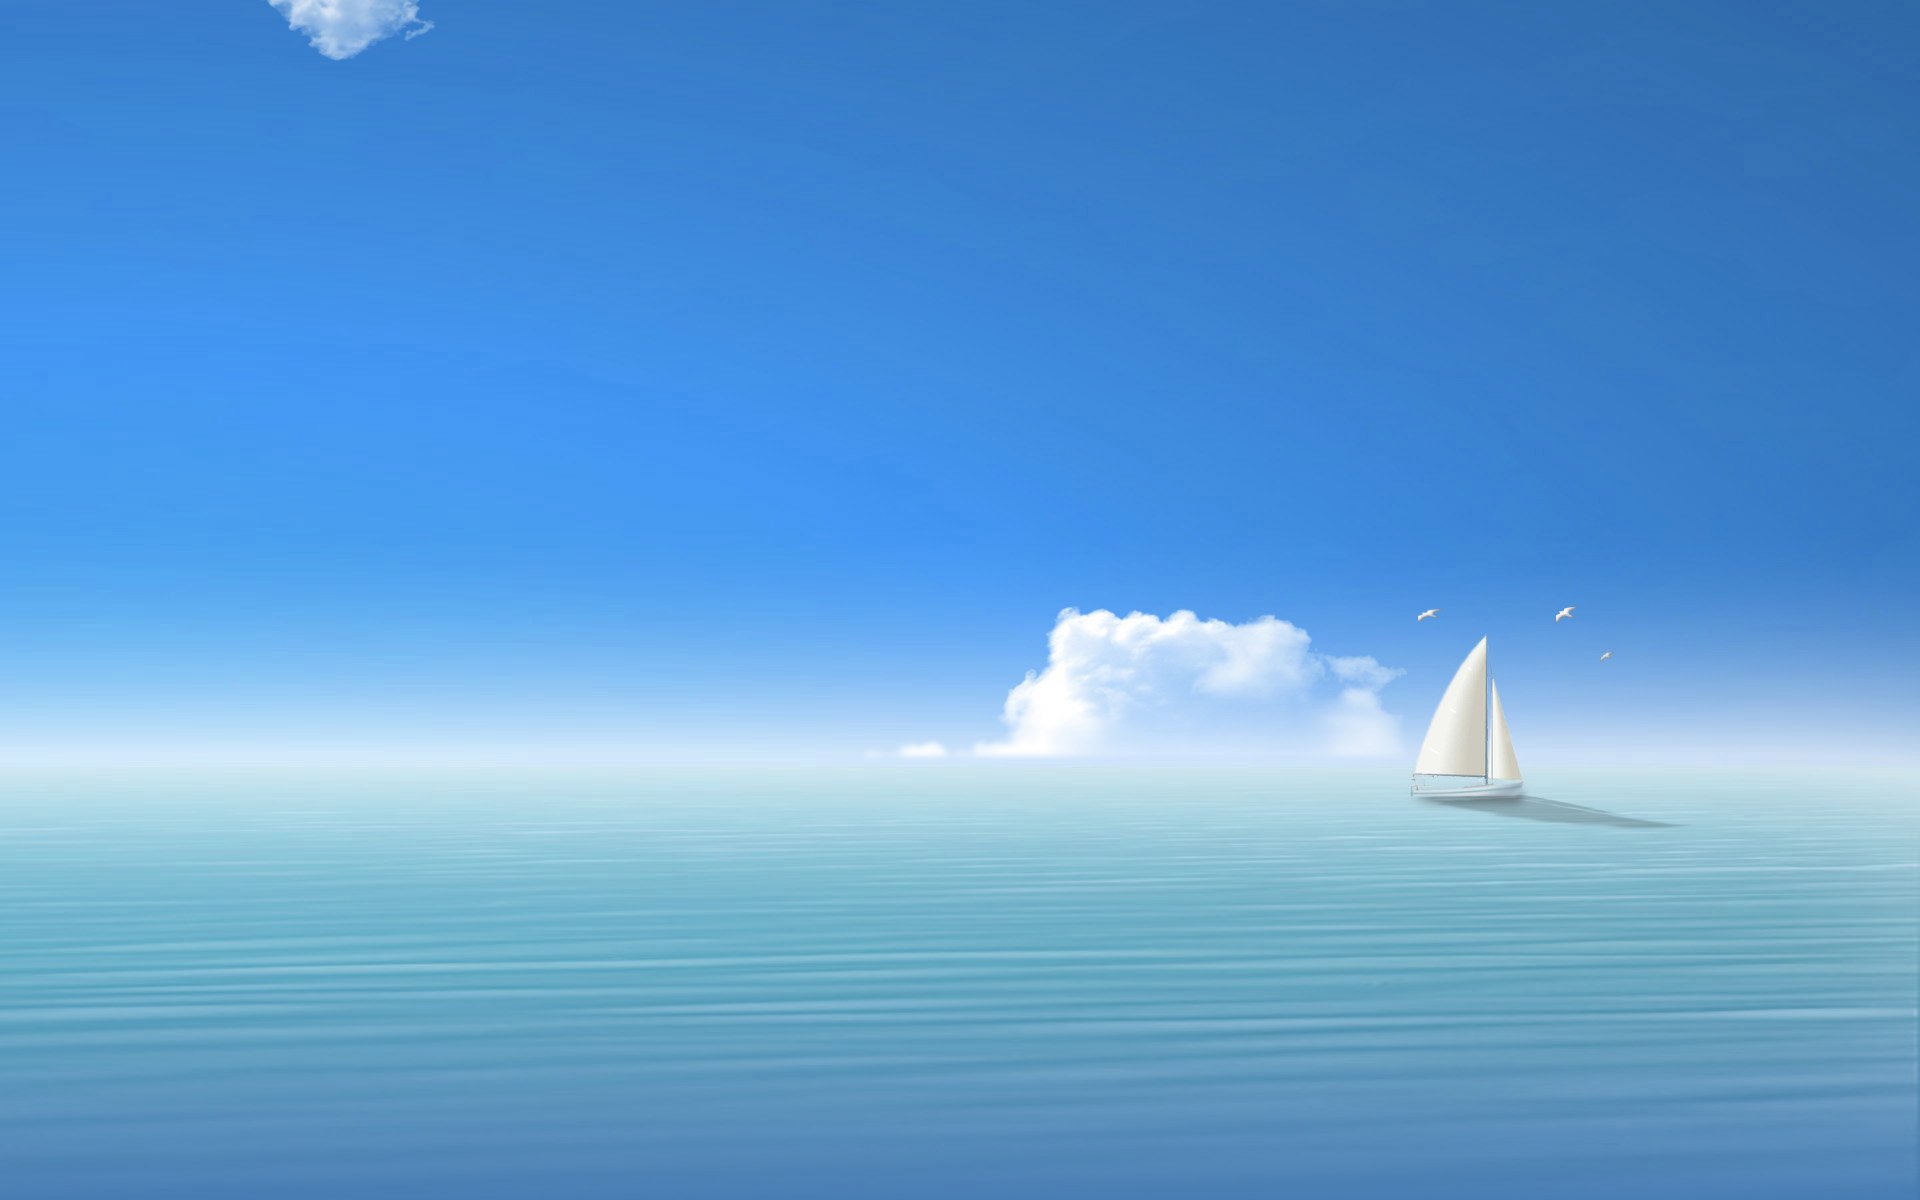 ocean hd wallpaper android which is under the ocean wallpapers 1920x1200